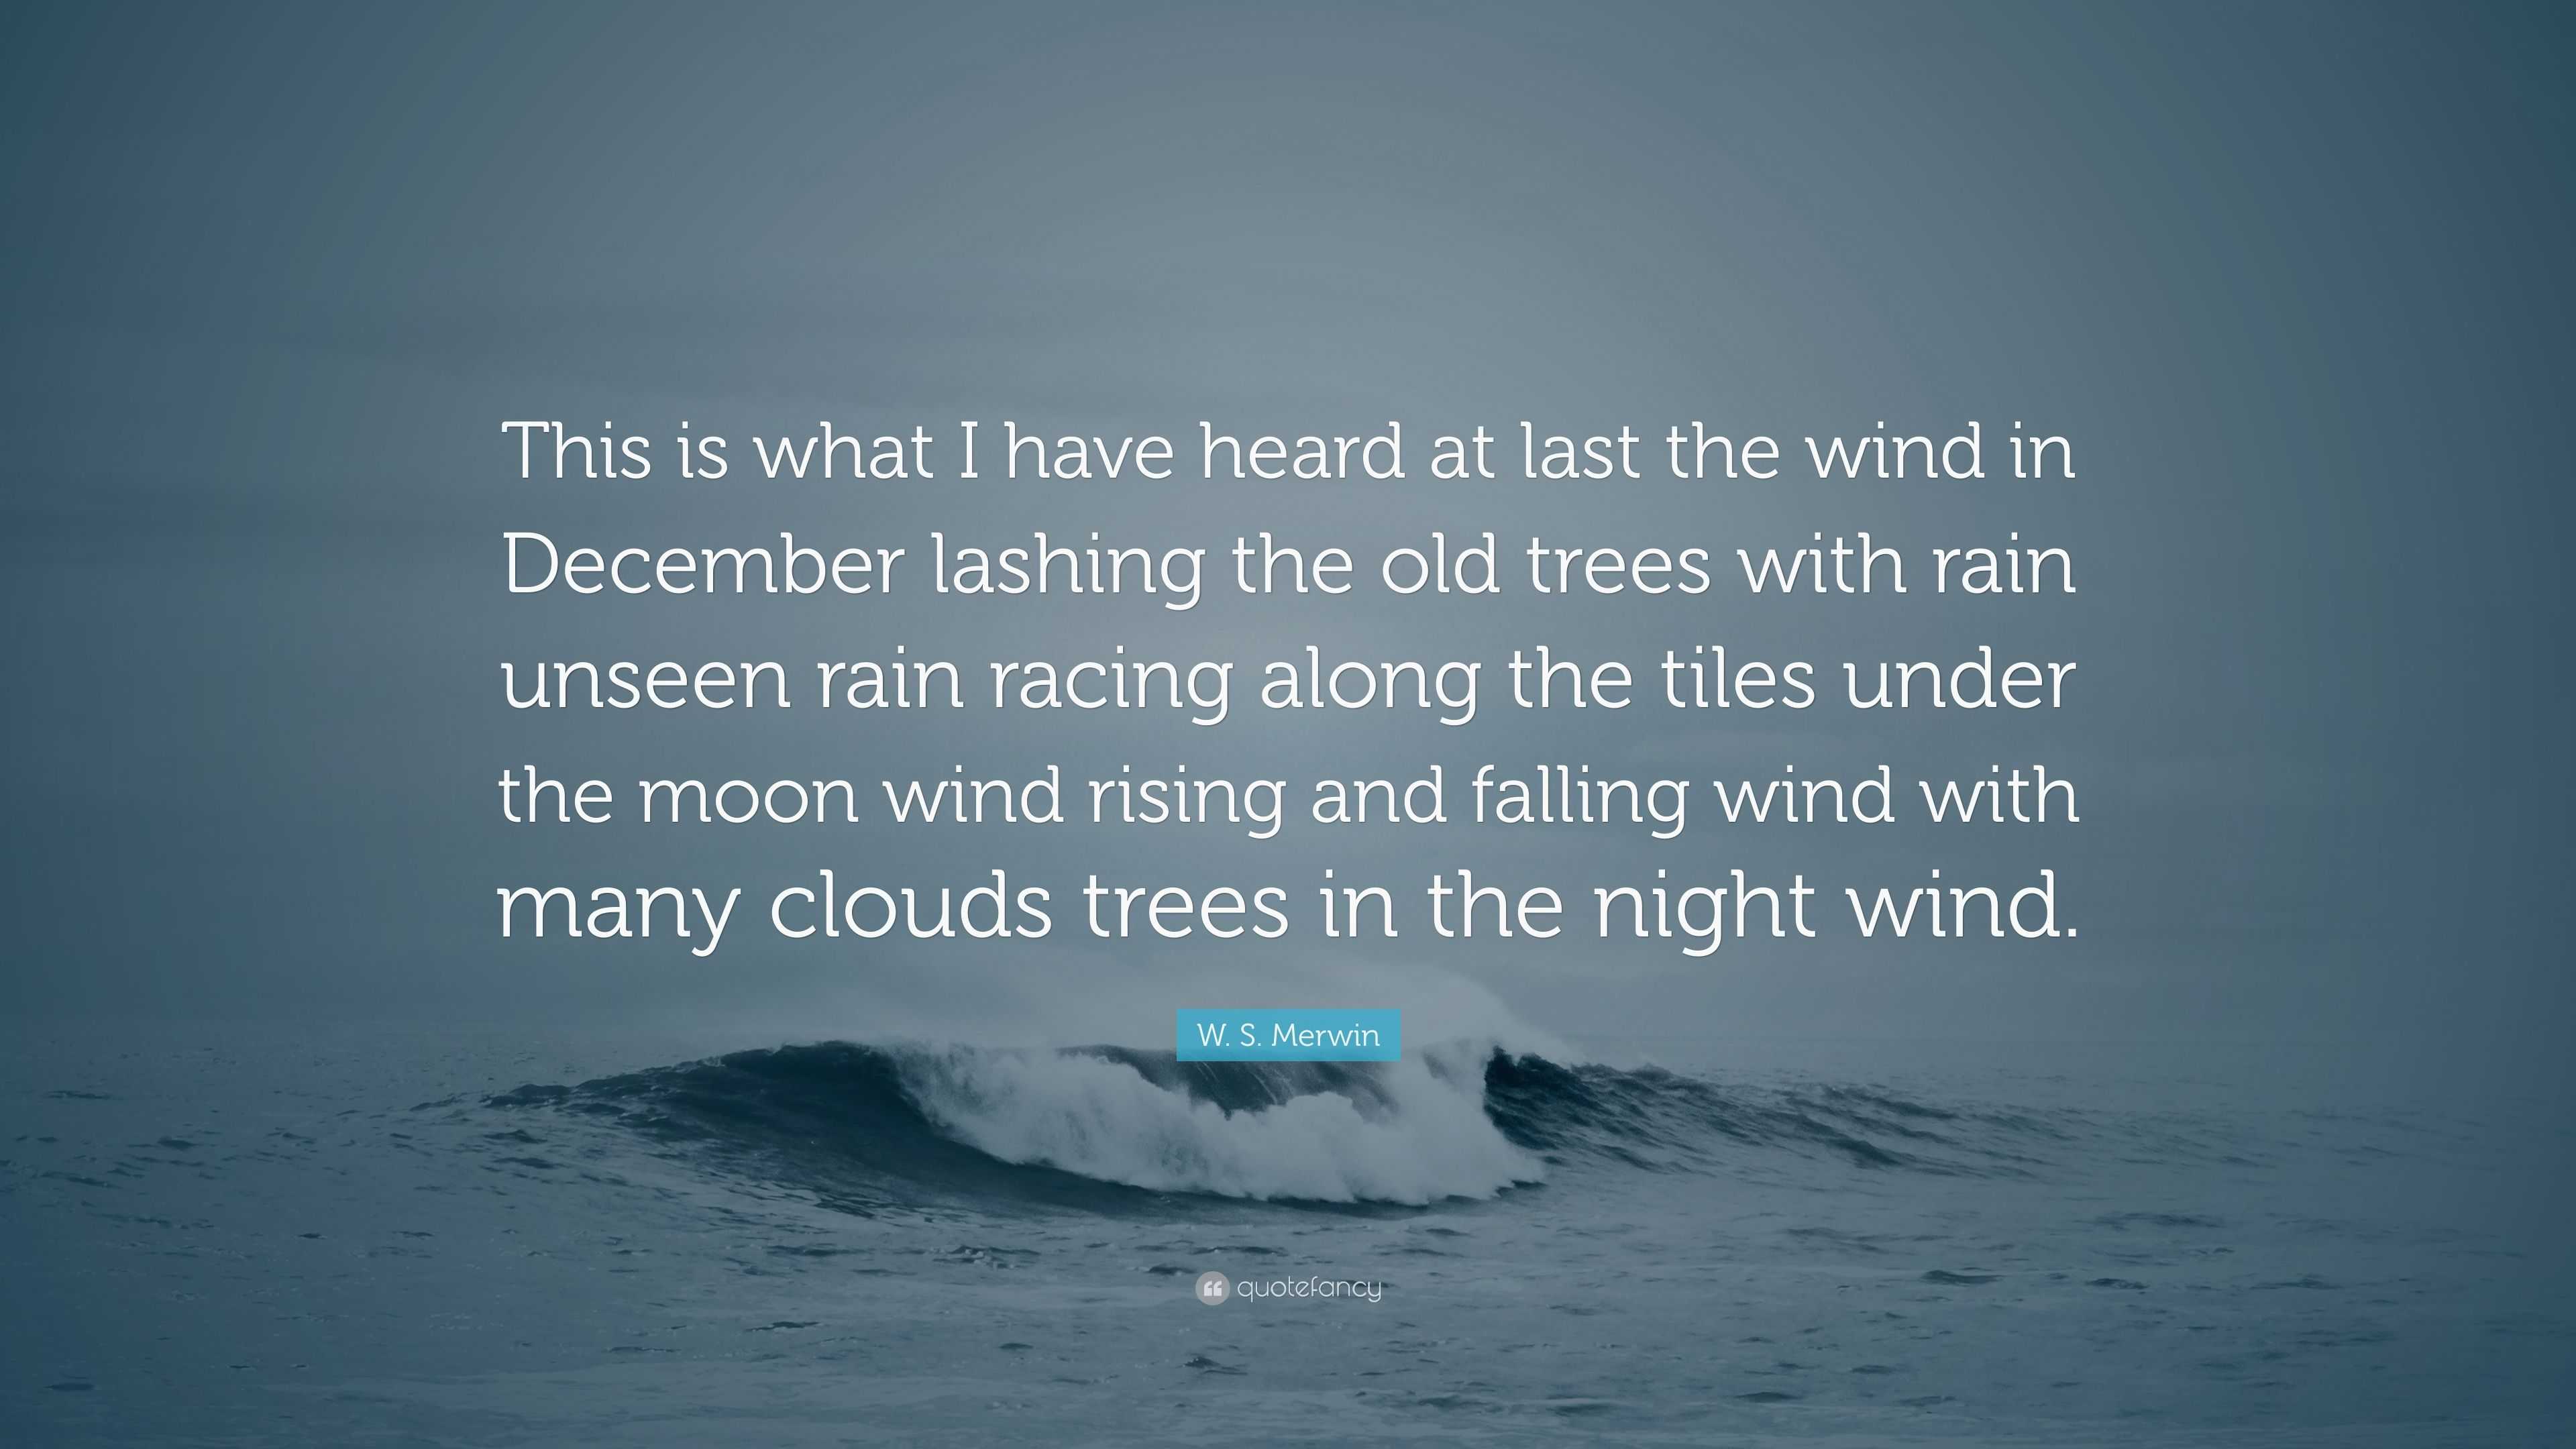 W. S. Merwin Quote: “This is what I have heard at last the wind in December  lashing the old trees with rain unseen rain racing along the tile”